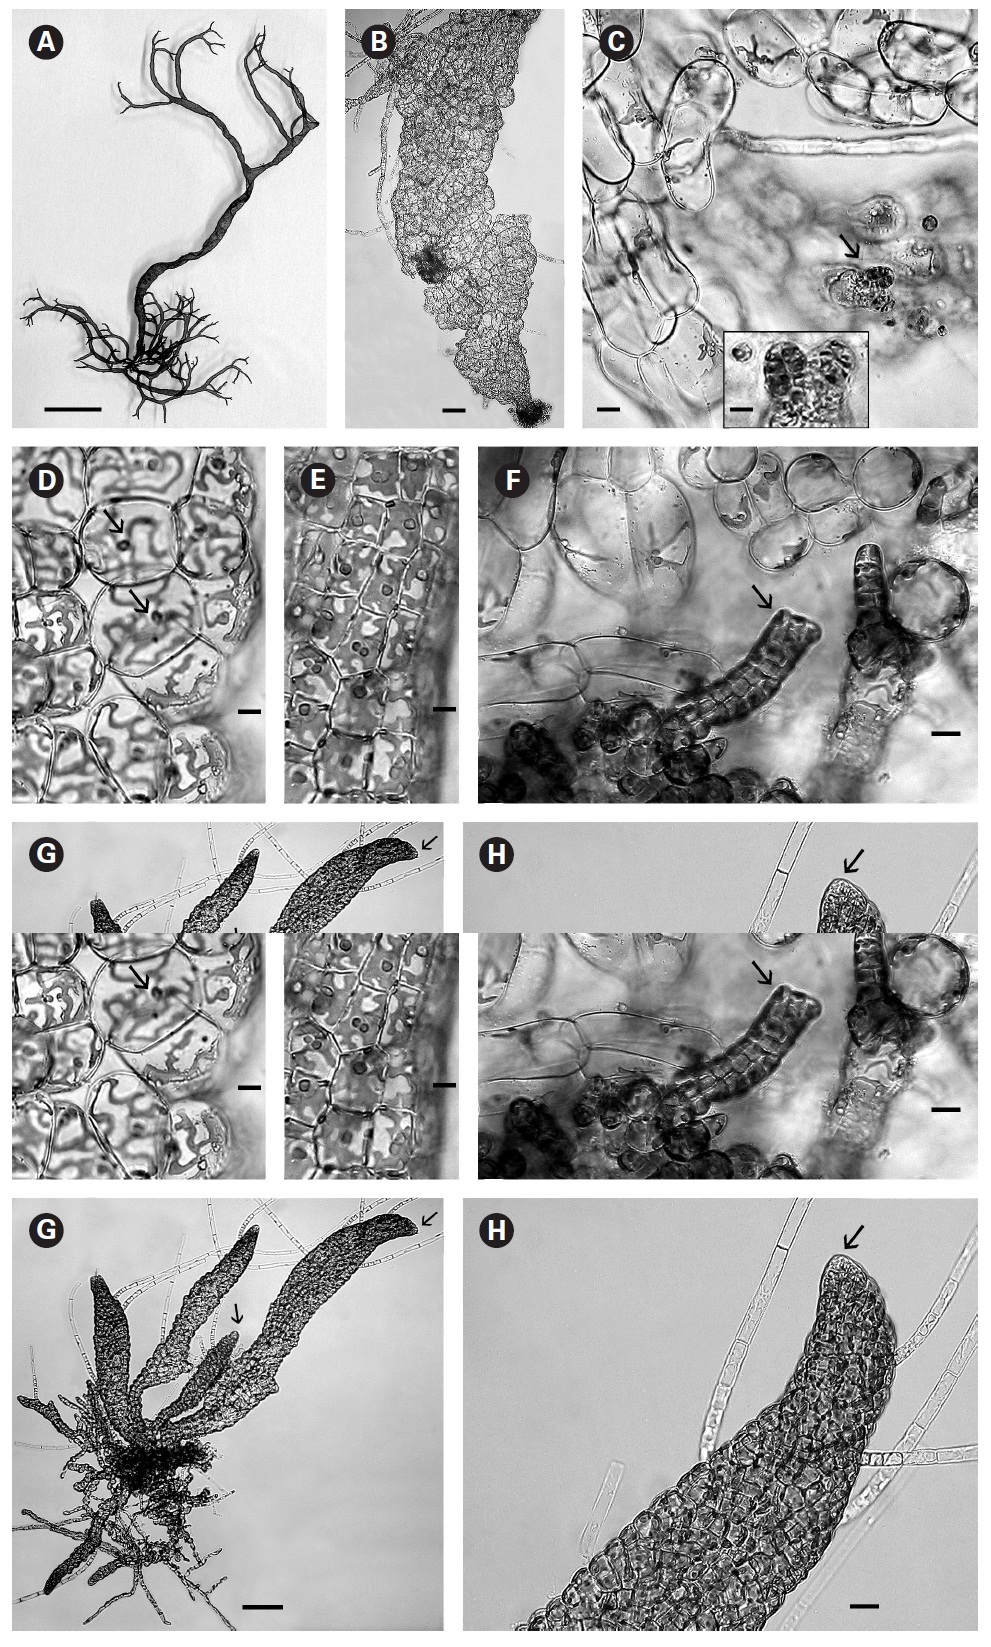 (A) Mature 4.5 cm thallus with 4 orders of branching and new shoots developing from basal system. Grown in full light on shaker. (B) In low light a weakly organized thallus of large inflated cells developed. Compare with the thallus in Fig. 1A. (C) Tiny plurangial packet (arrow) on the inflated cells like those seen in Fig. 1B. Inset showing enlarged plurangial packet. (D) Thallus grown in low light (2-3 ㎛ol photons m-2 s-1). Inflated cells with single chloroplast showing very slender branching and single pyrenoid (arrows). (E) Thallus grown in > 20 ㎛ol photons m-2 s-1. Cells smaller and rectangular with larger chloroplast than in Fig. 1D. Paired pyrenoids in some cells may indicate the onset of cell division. (F) Brighter light triggers formation of uniaxial shoots (arrow) from inflated cells of thallus grown in low light. Shoots 4 days old. (G) Multiple shoots with single-cell apices (arrows) arising from basal filamentous mat. (H) Twenty five-day-old shoot with single-cell apex (arrow) compact cortex and numerous phaeophycean hairs in full light (30-35 ㎛ol photons m-2 s-1). Scale bars represent: A 1.00 cm; B & G 50 ㎛; C 10 ㎛ inset 20 ㎛; D & E 10 ㎛; F 20 ㎛; H 100 ㎛.